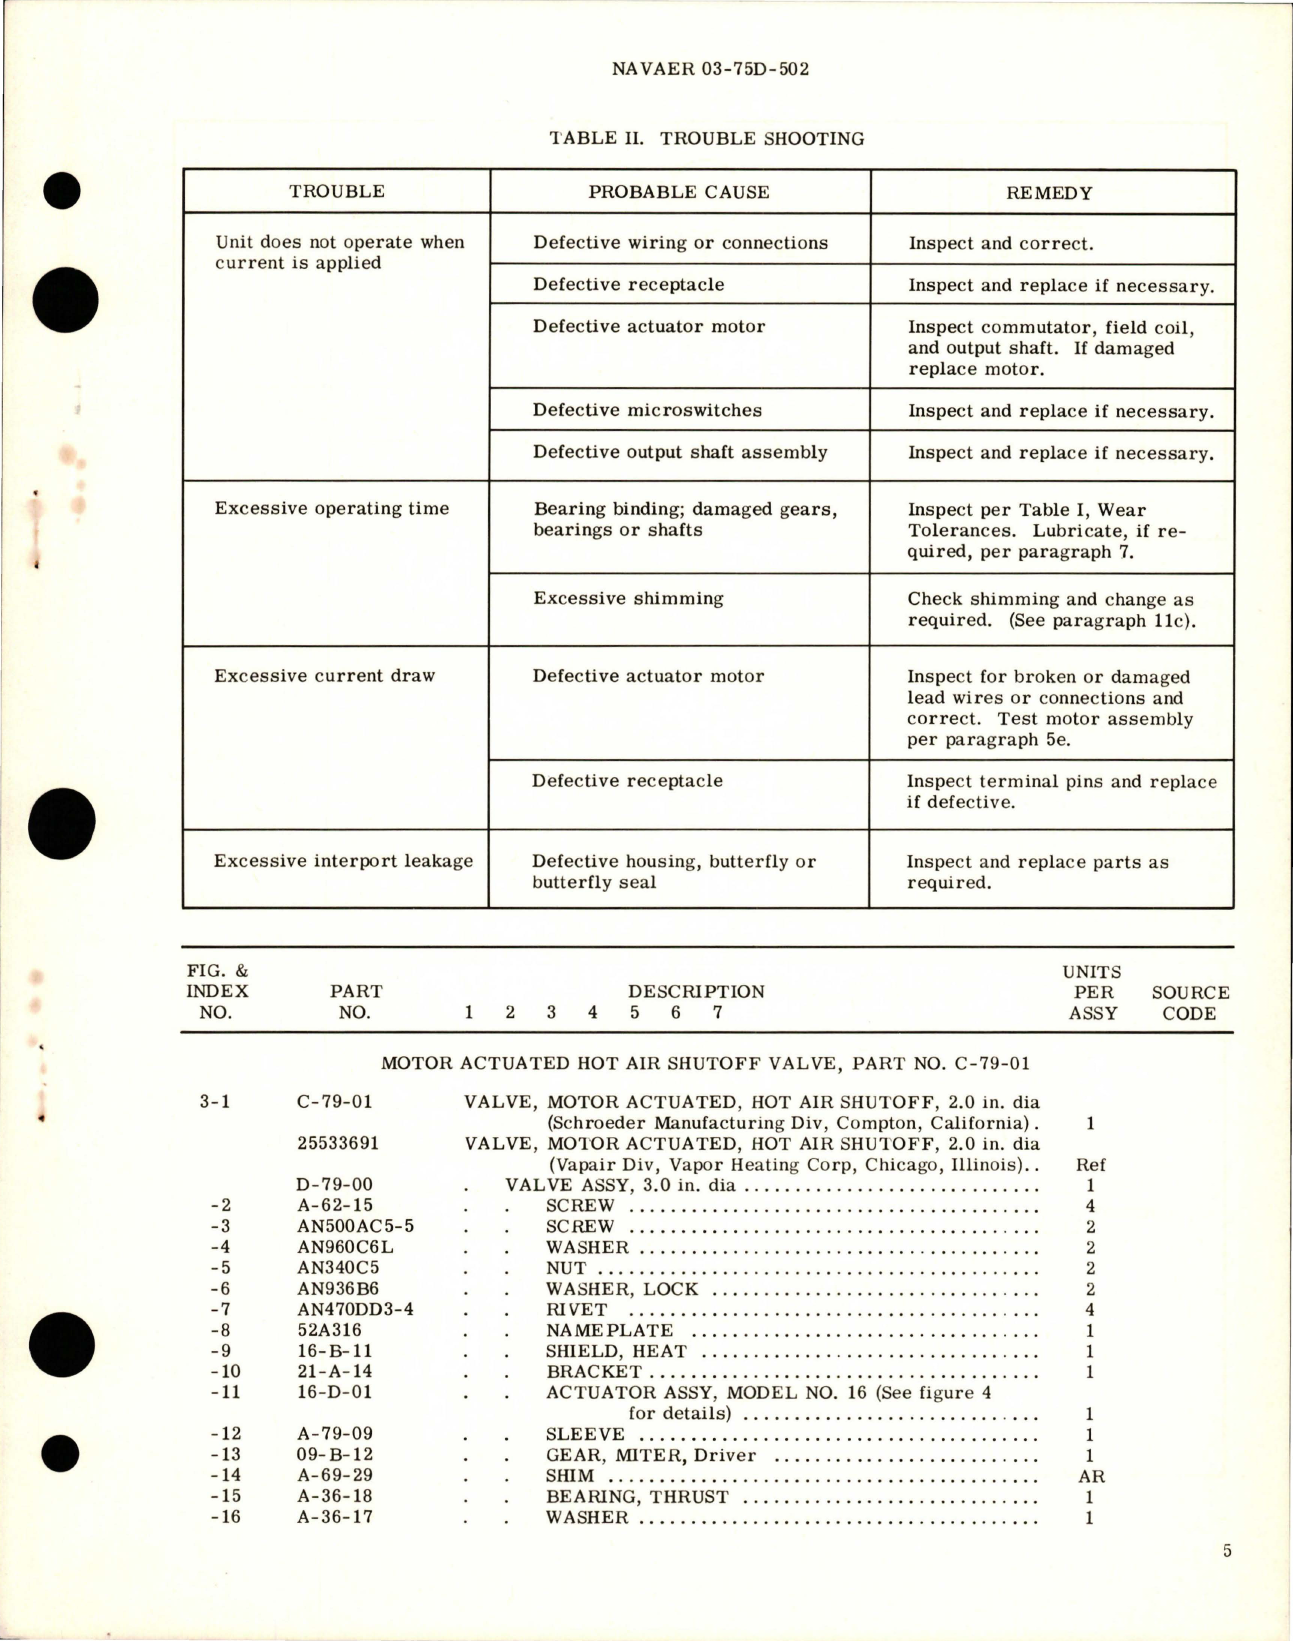 Sample page 5 from AirCorps Library document: Overhaul Instructions with Parts Breakdown for Motor Actuated Hot Air Shutoff Valve - Part C-79-01 and 25533691